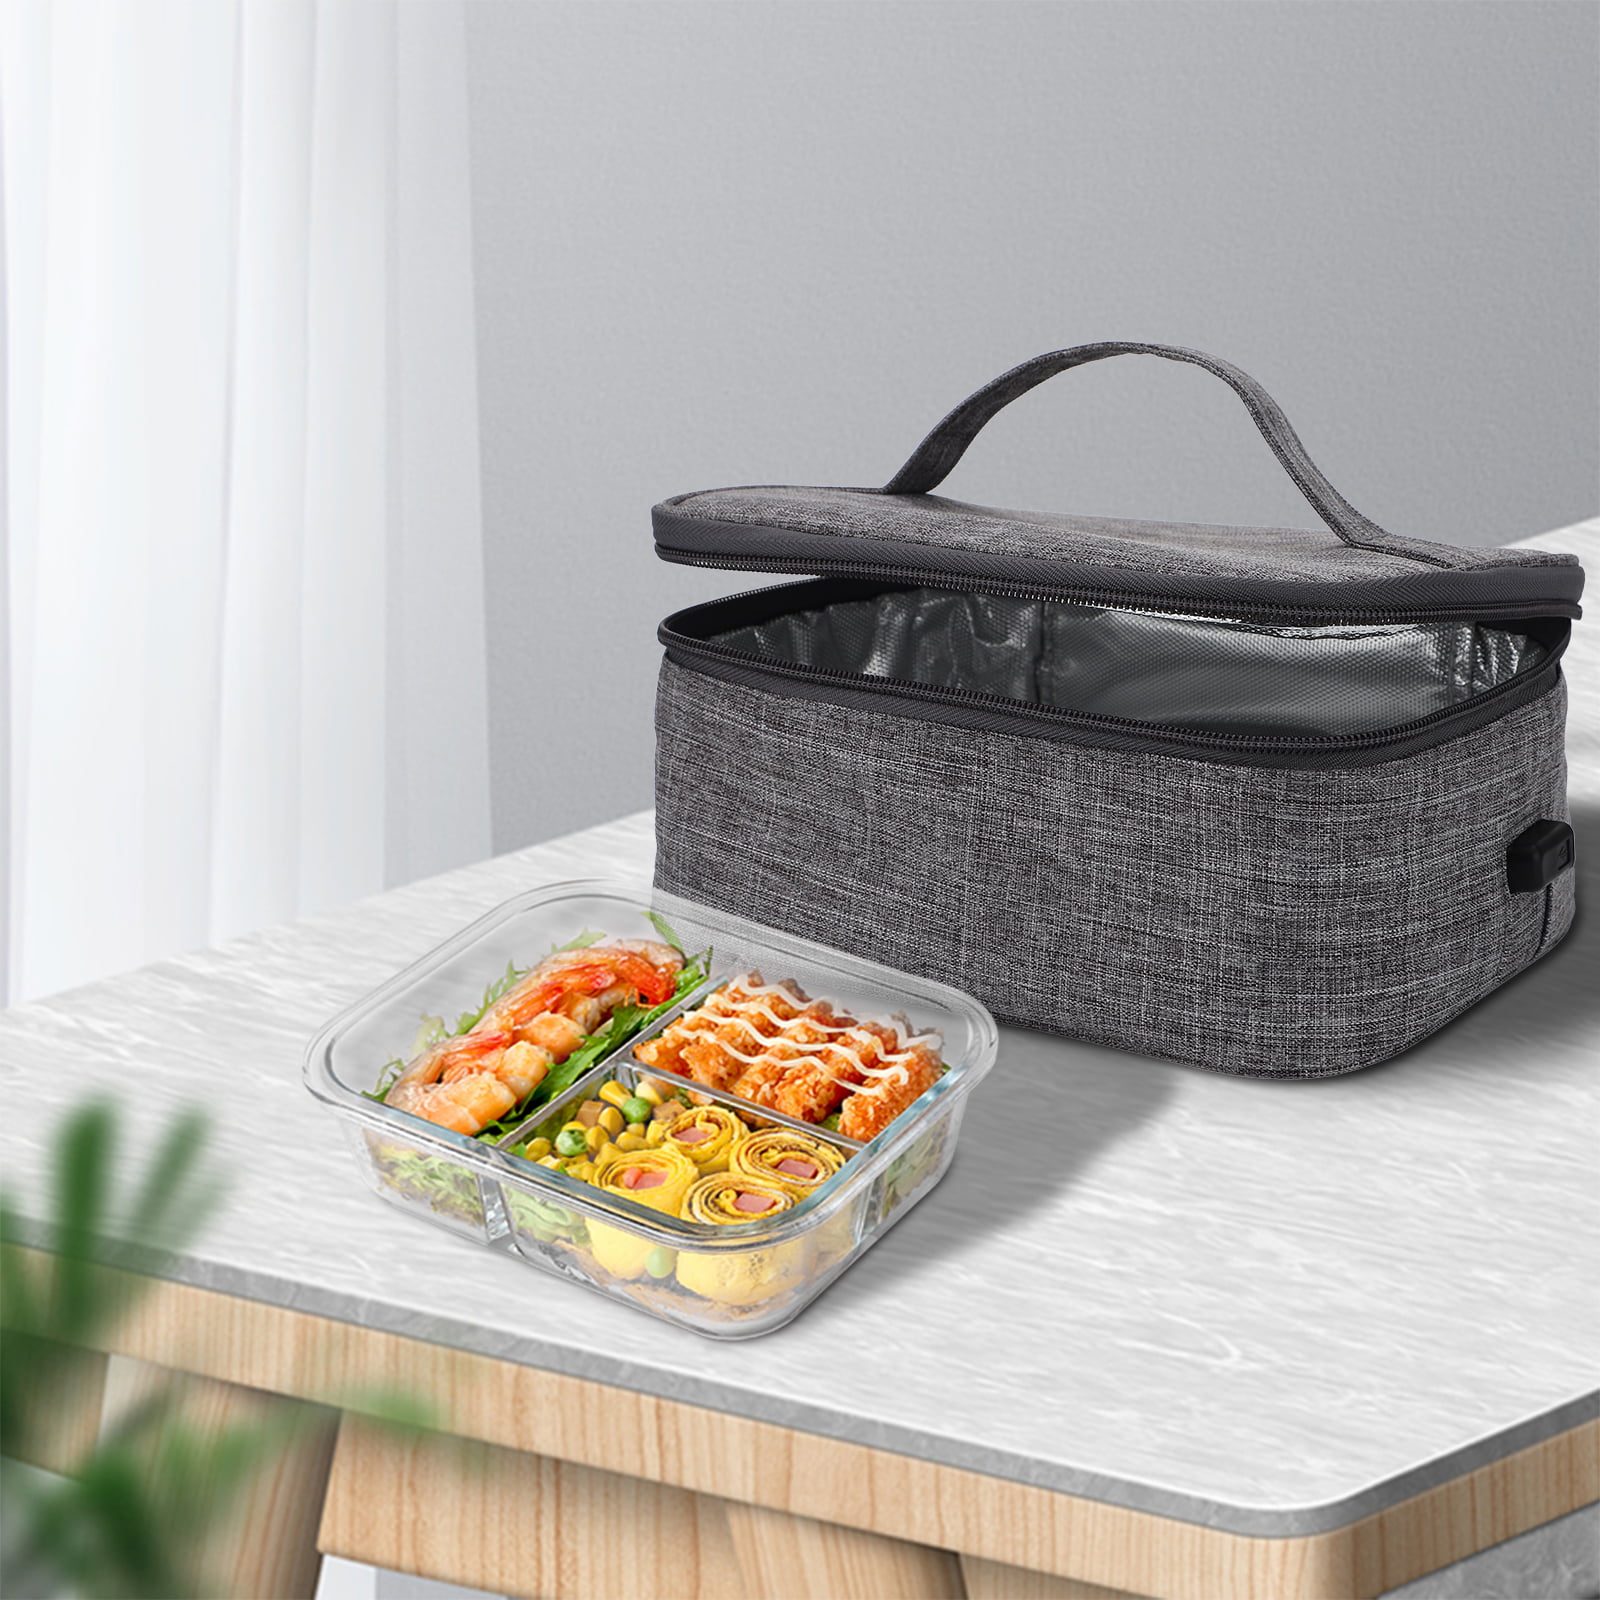  Aotto Portable Oven Personal Food Warmer - 110V Portable Mini  Microwave Electric Heated Lunch Box for Work, Cooking and Reheating Meals  in Office, Potlucks, Travel Hotel, Home Kitchen (Black): Home 